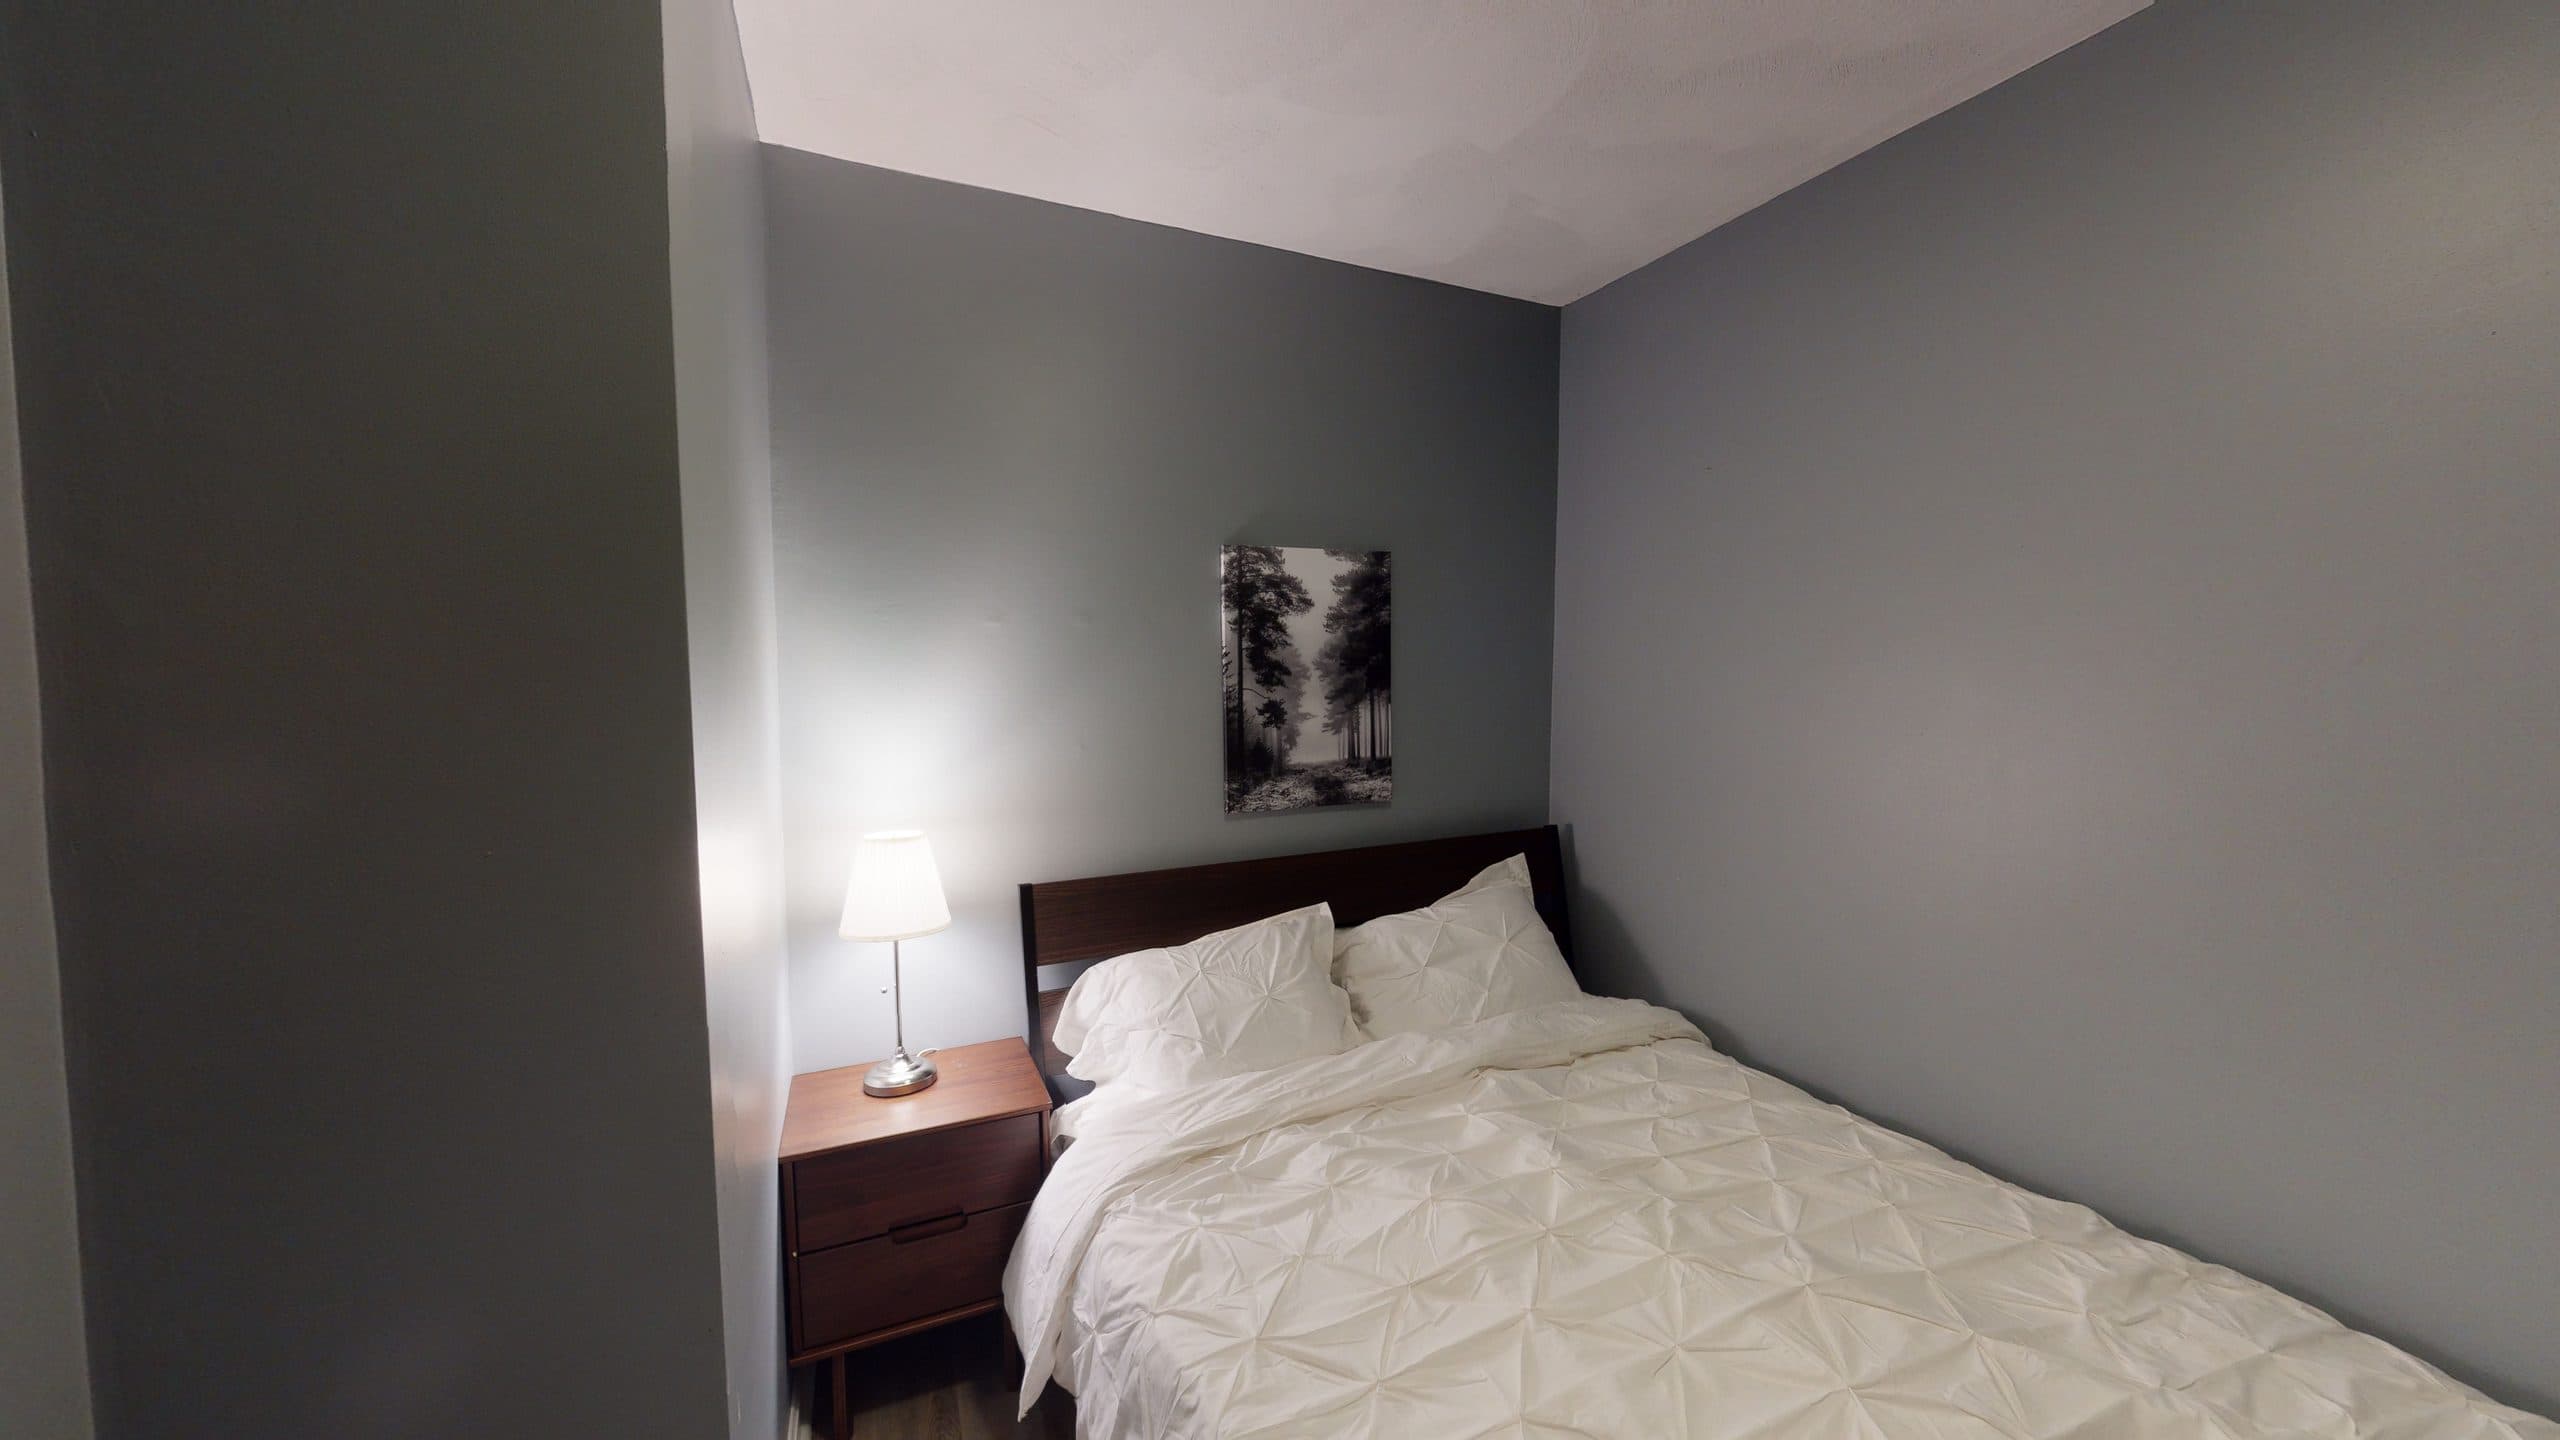 Photo 21 of #1287: Queen Bedroom A at June Homes